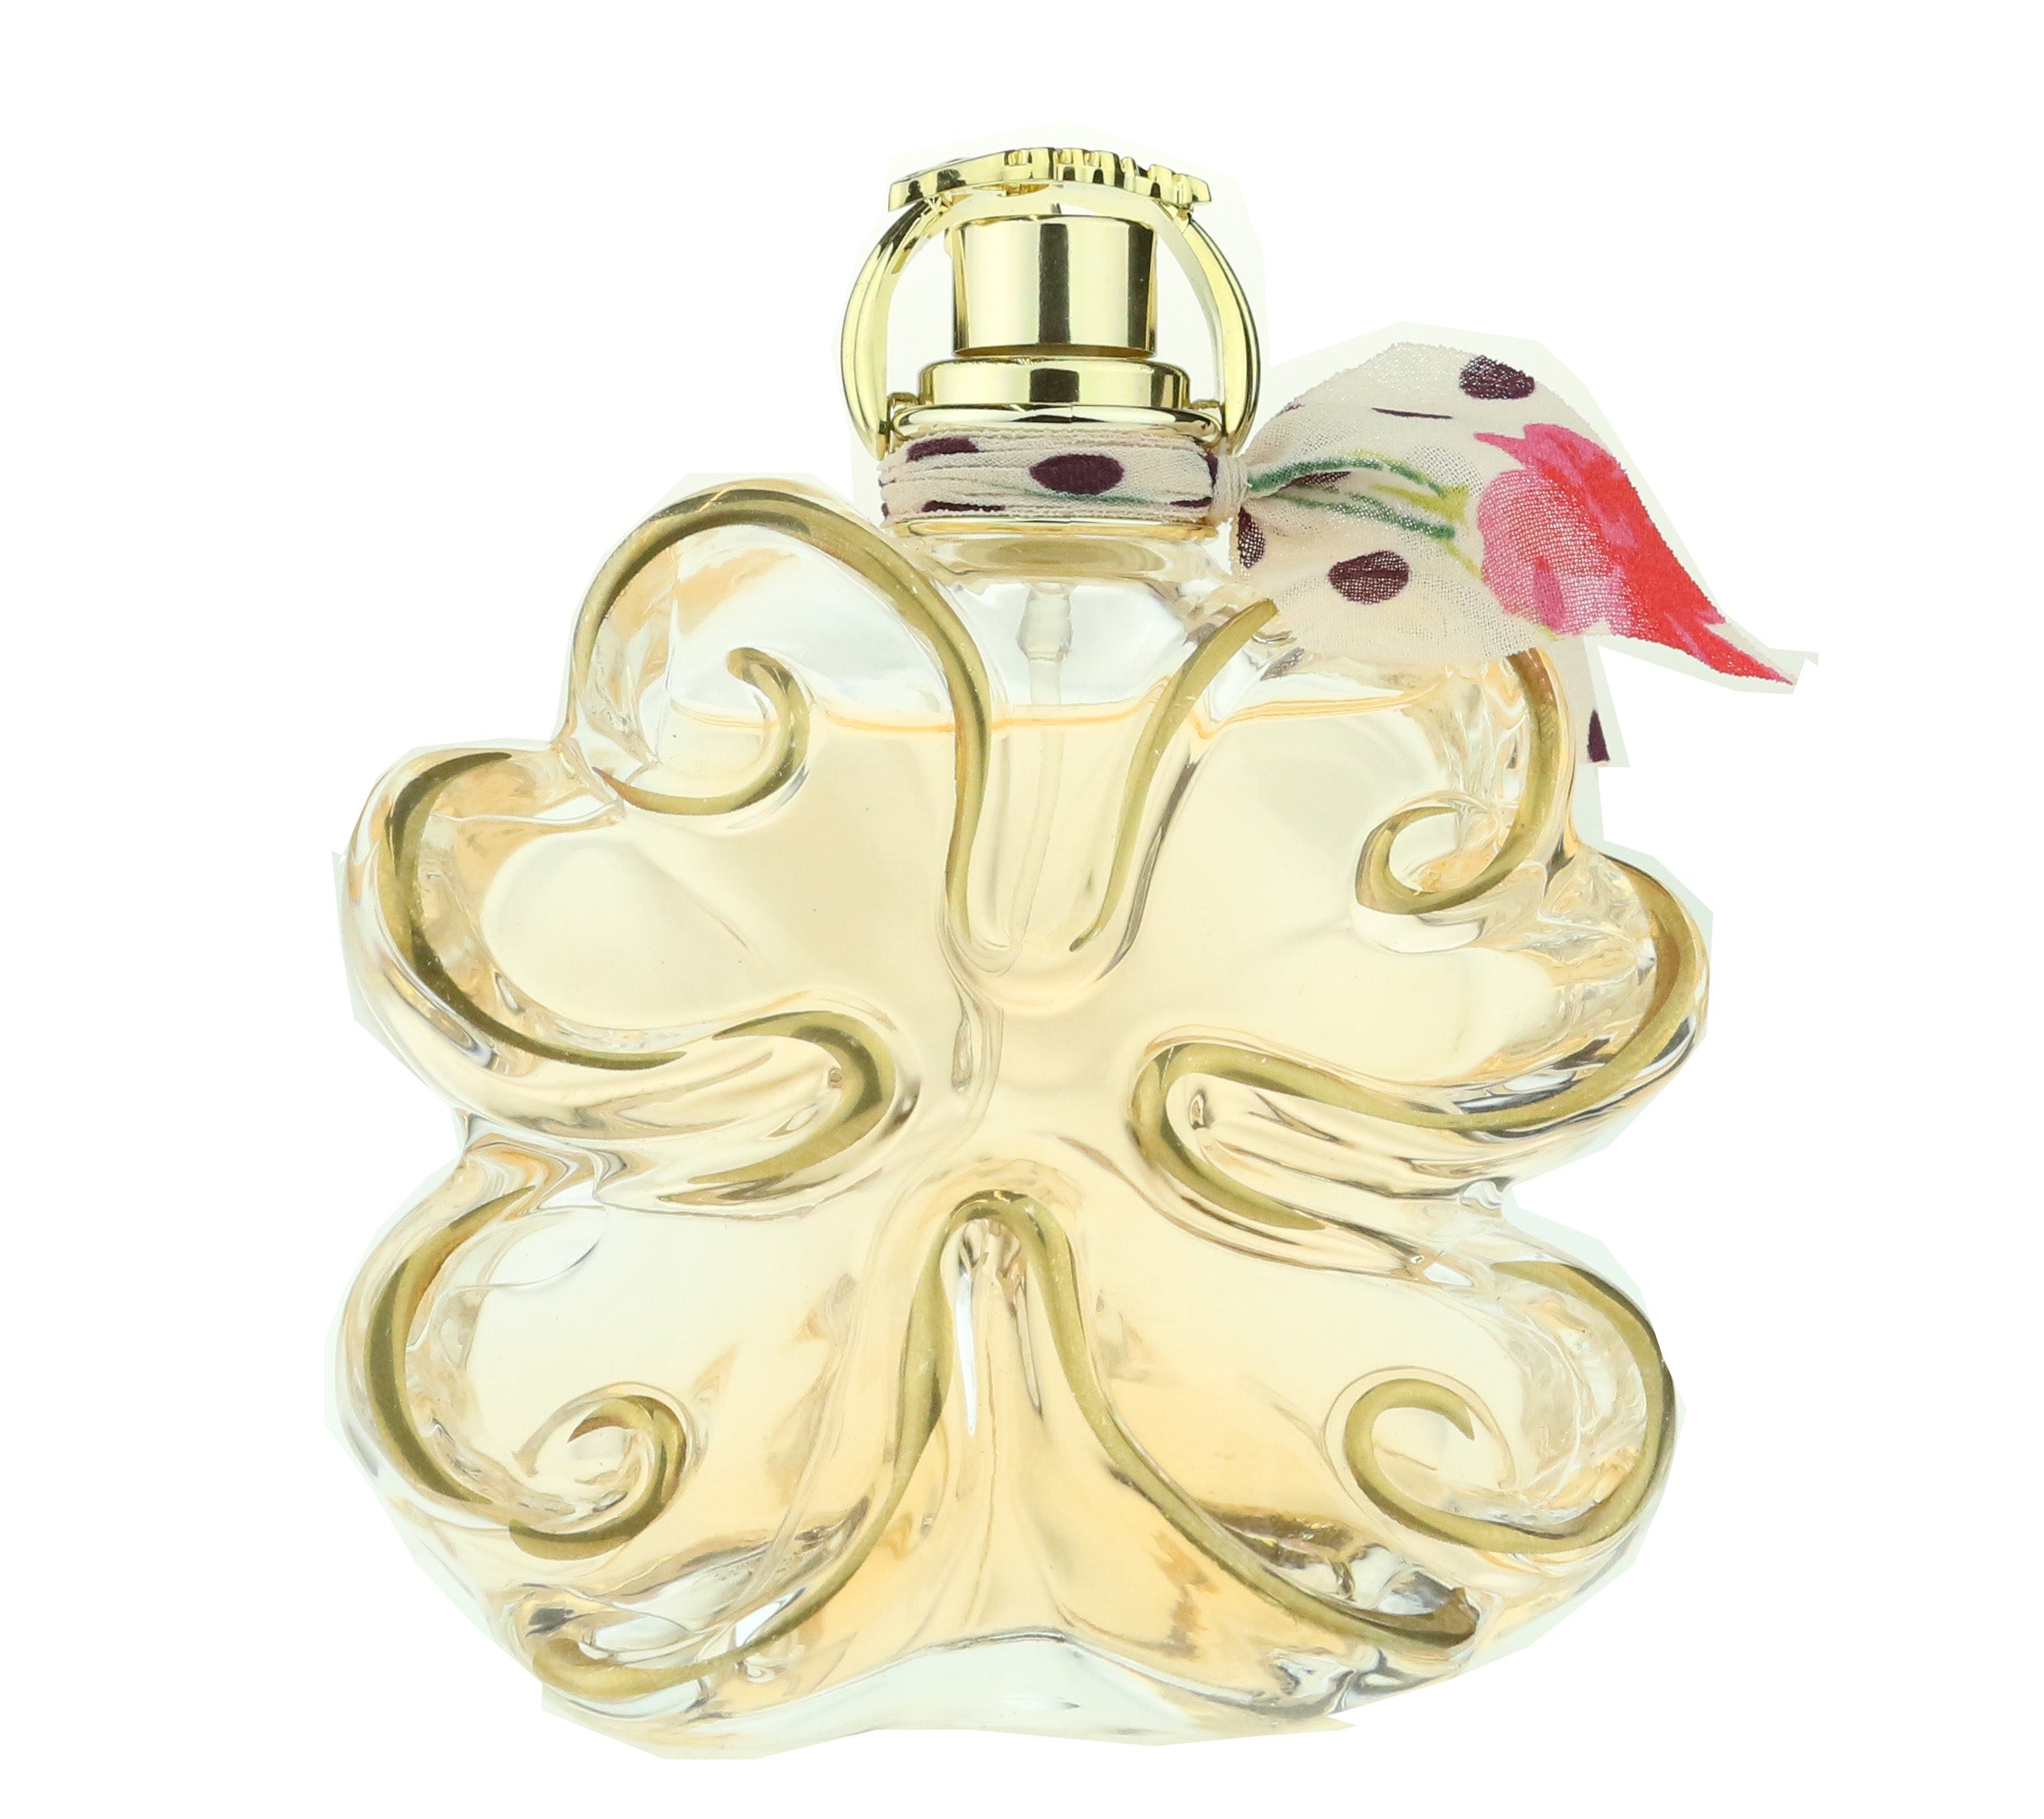 Luca Turin and the mischievous secret of scent — Lateral Magazine